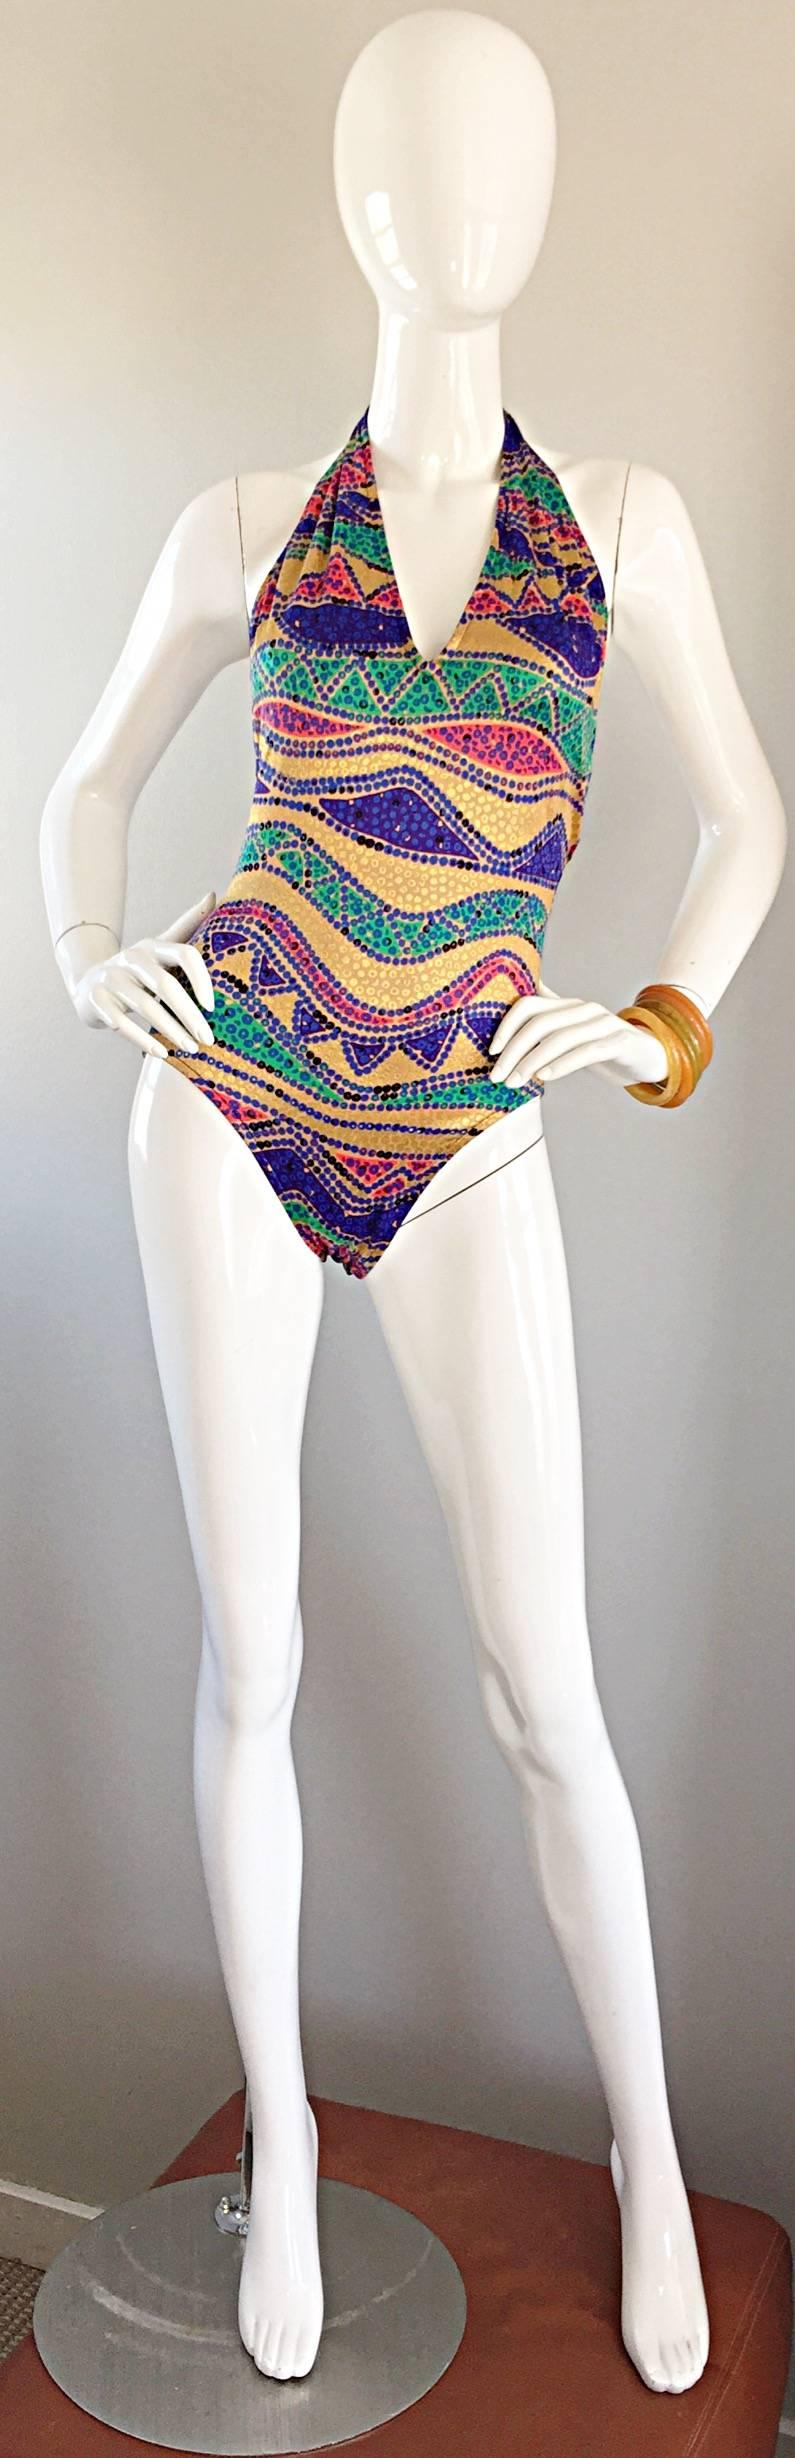 Amazing vintage BILL BLASS 80s one piece swimsuit! Features vibrant colors of blue, red, green and metallic gold in a chic tribal print. Flattering Bodycon fit that is not only great for the pool or beach, but is totally in fashion to wear as a top